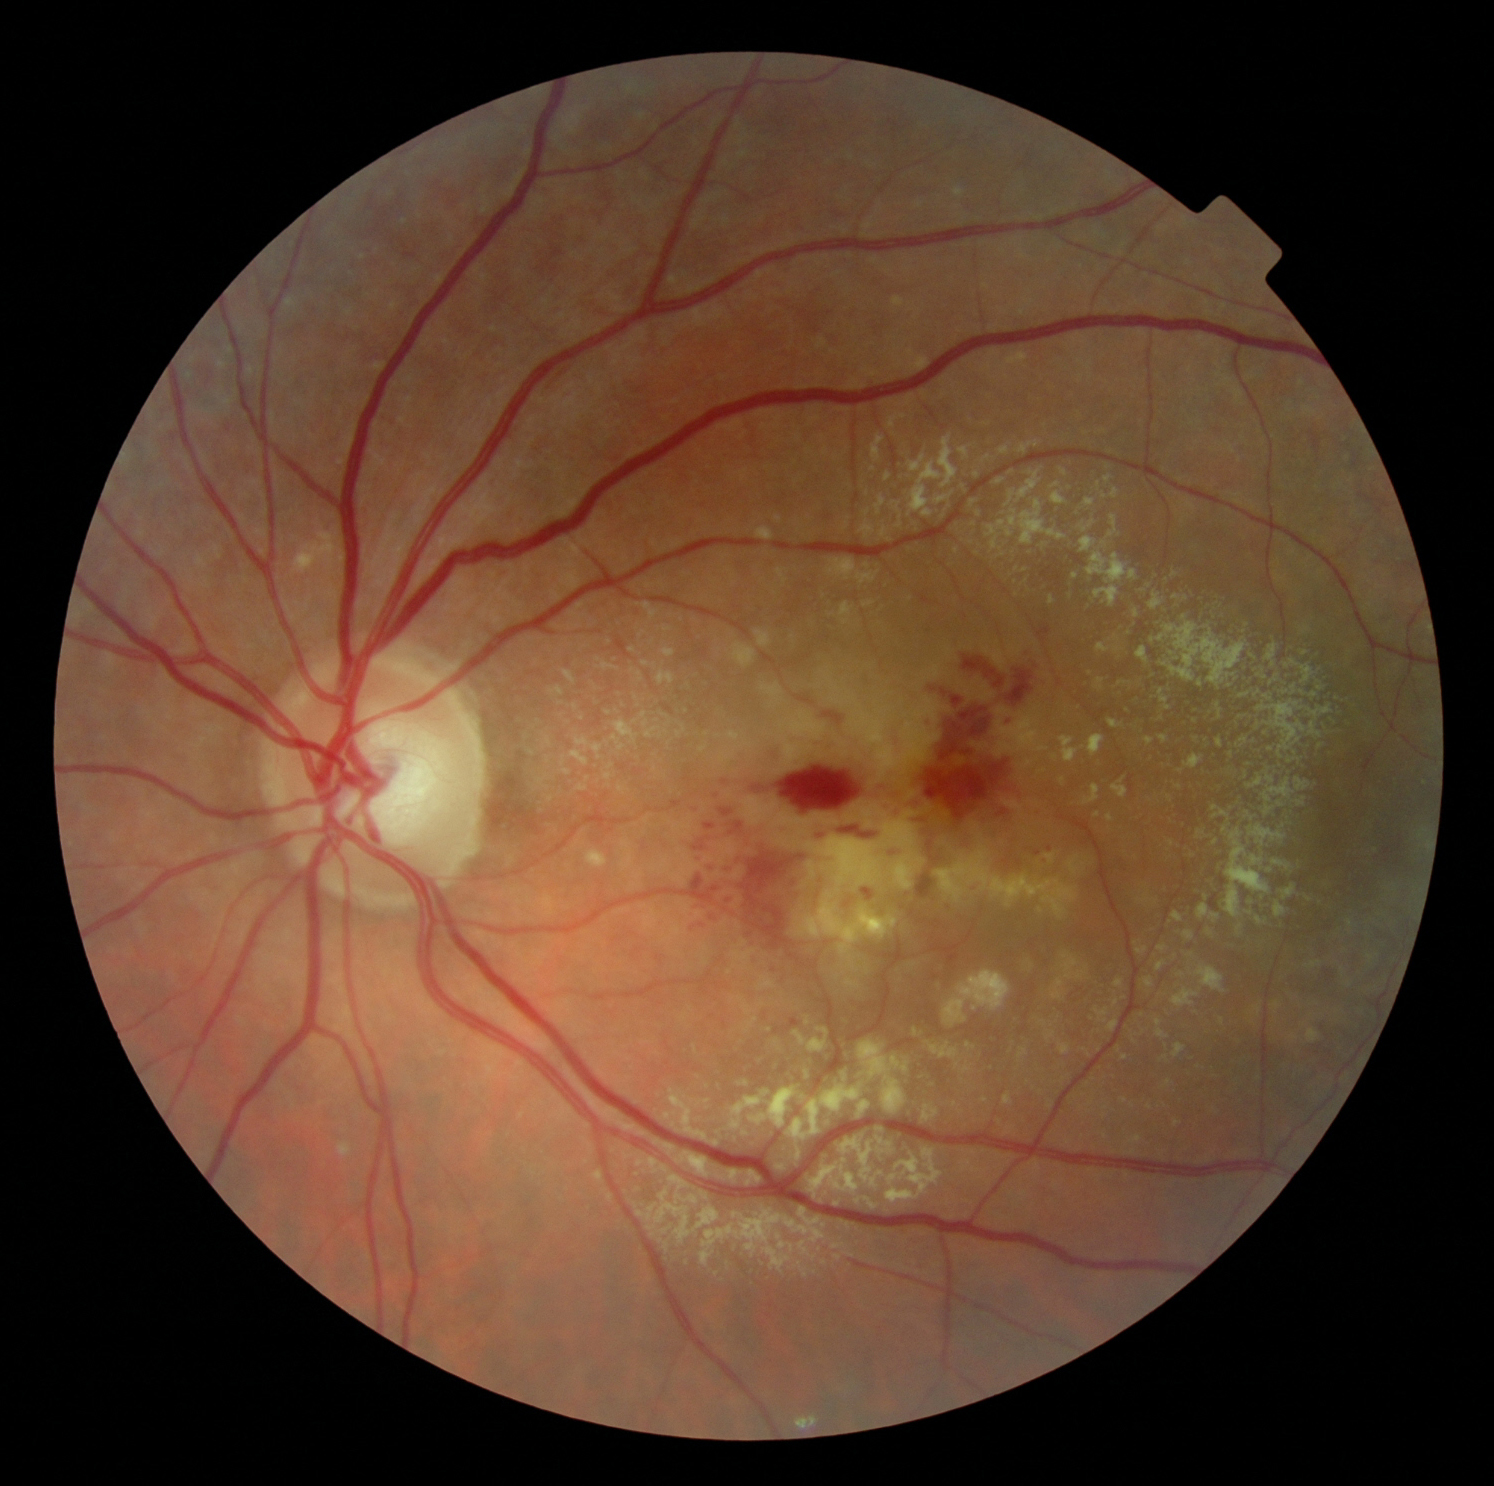 Macular Heamorrhage with Circinate Exudate